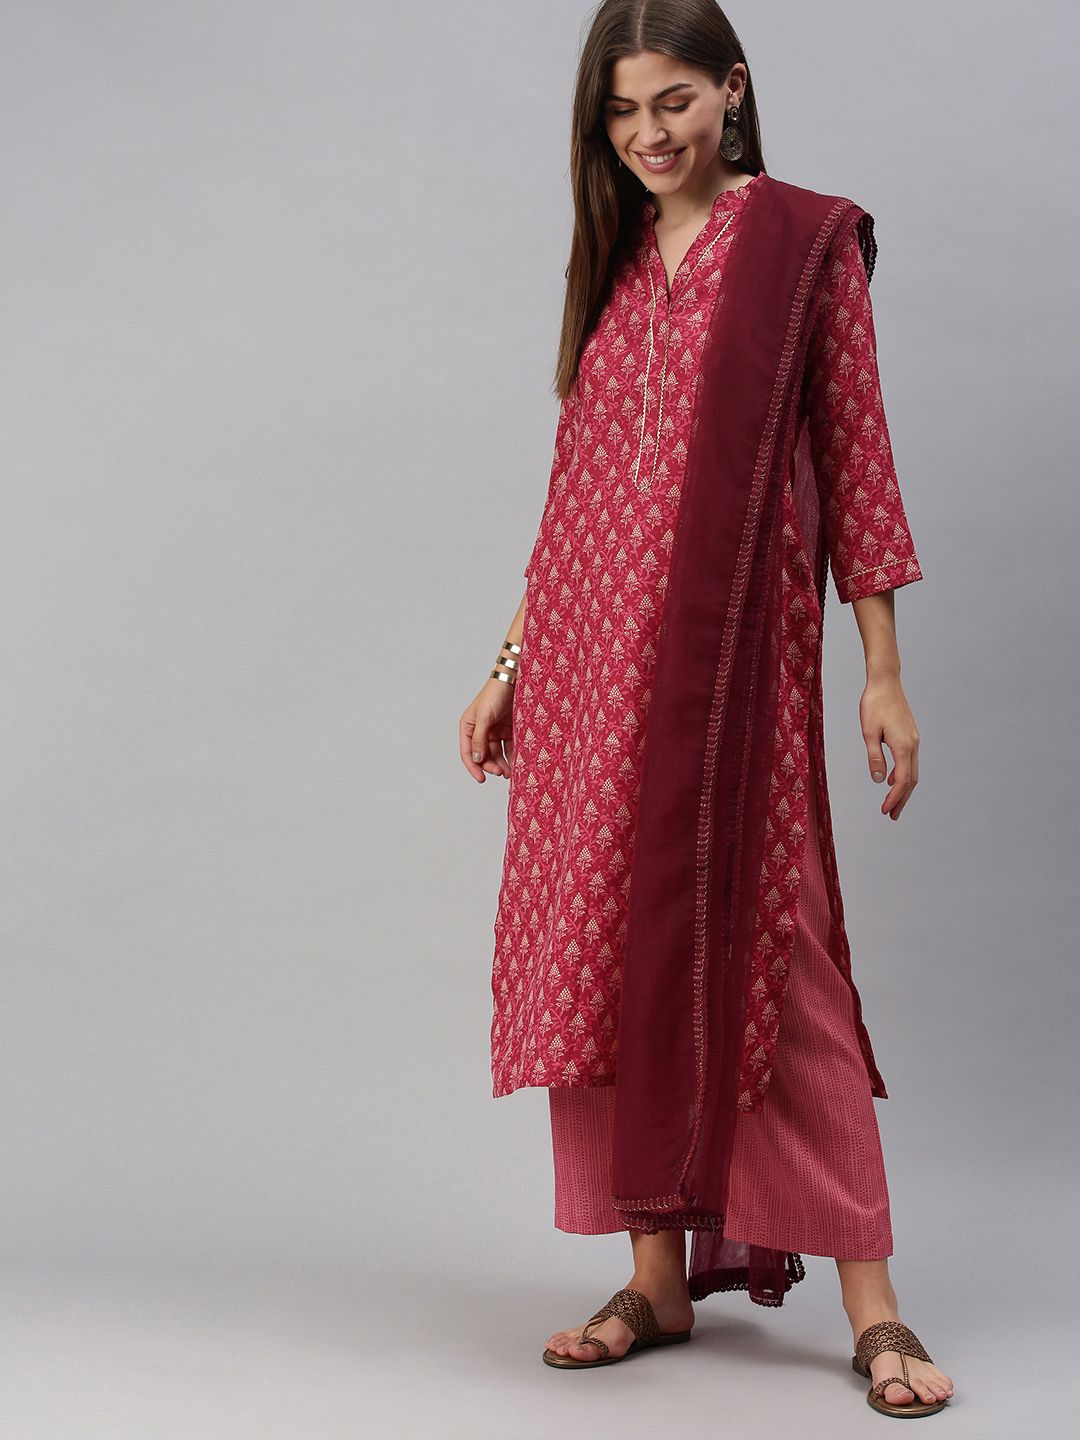 SheWill Pink Printed Unstitched Dress Material Price in India